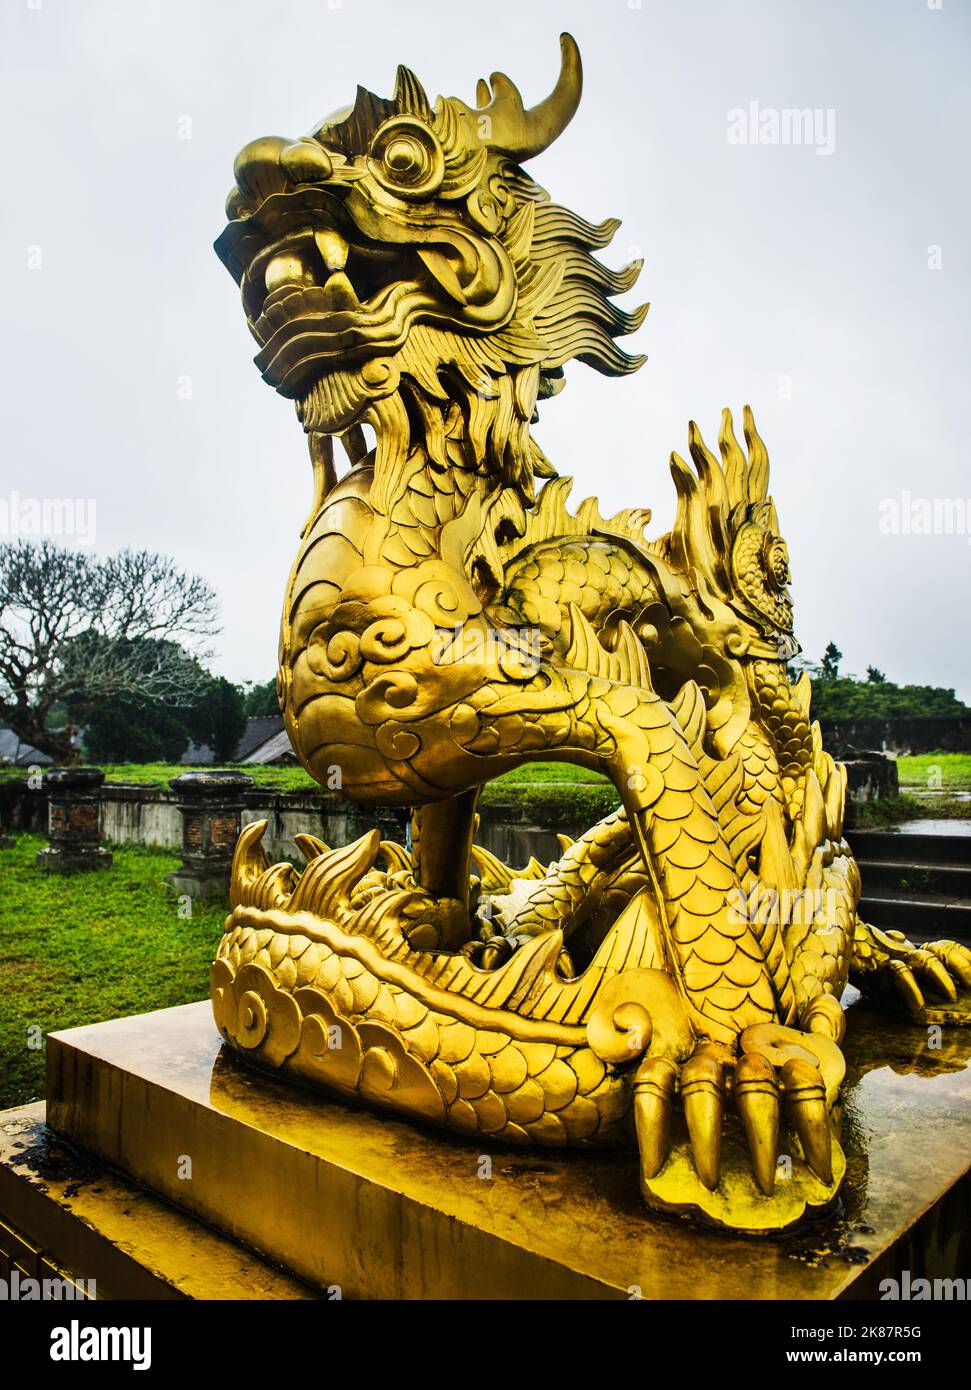 Golden statue inside the imperial city, Hue, Vietnam, Southeast Asia Stock Photo